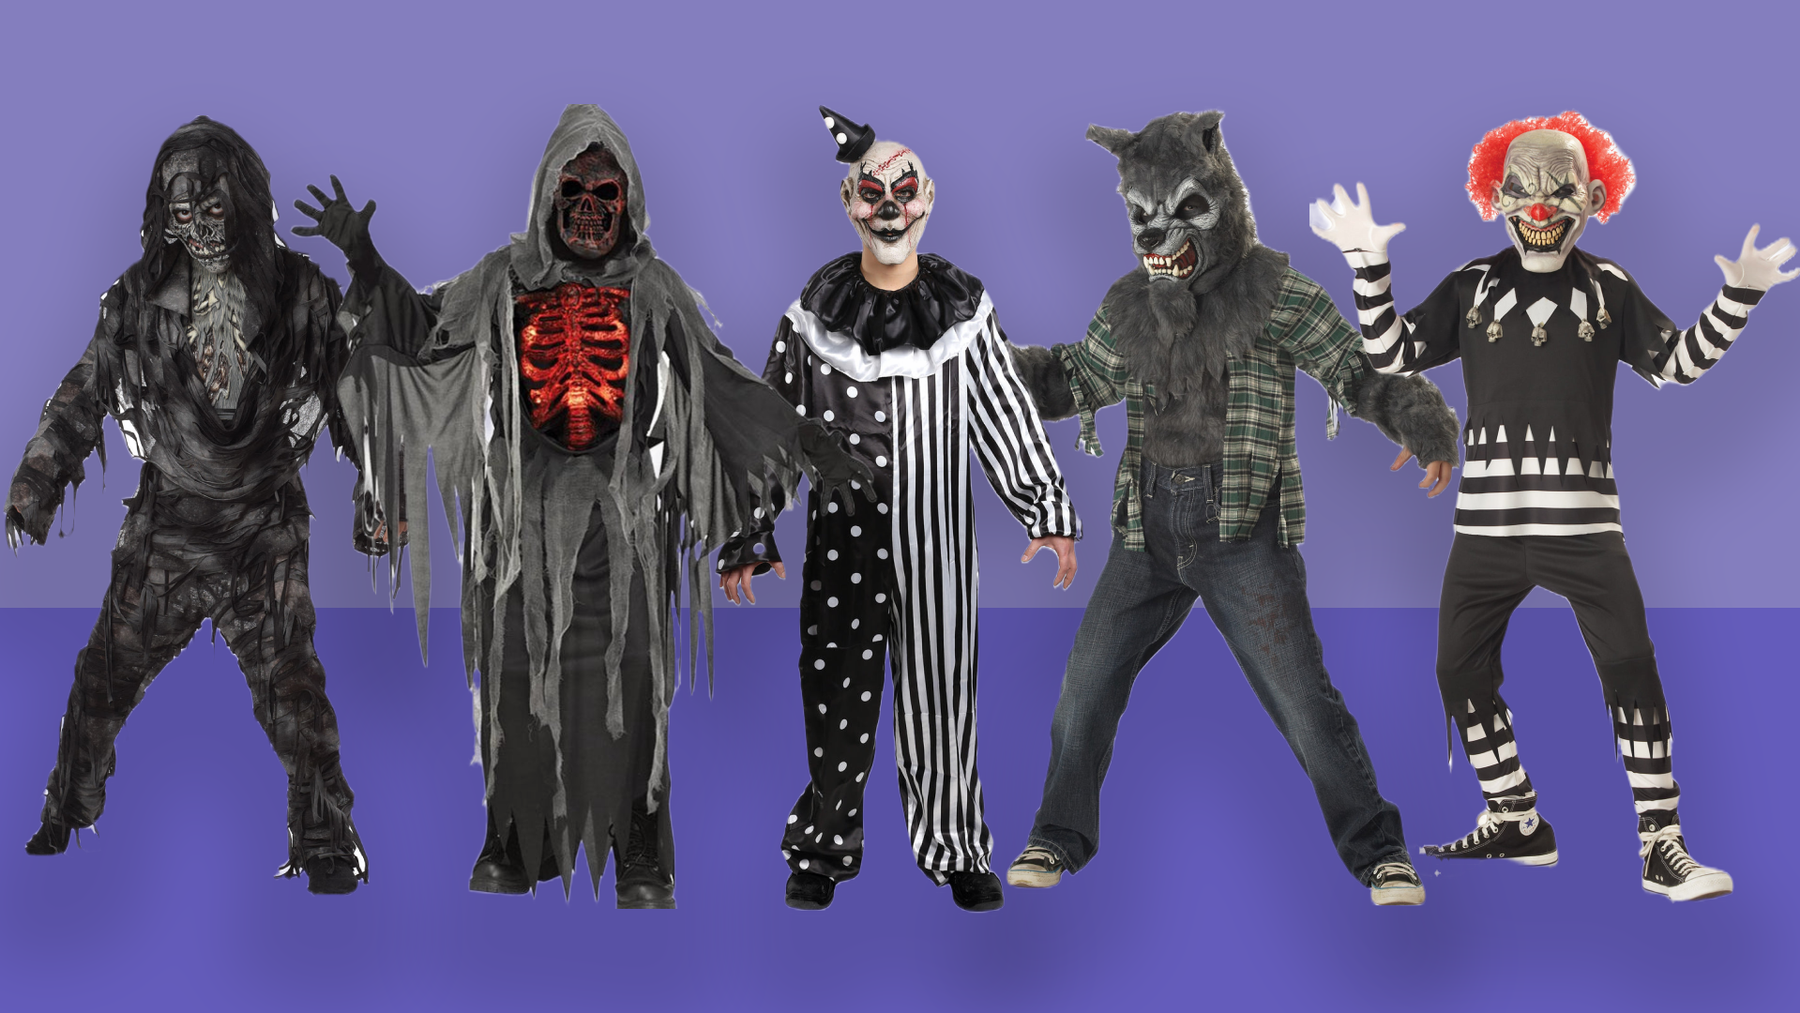 Frightfully Fun: The Top 5 Boy’s Halloween Costumes That Will Steal the Show